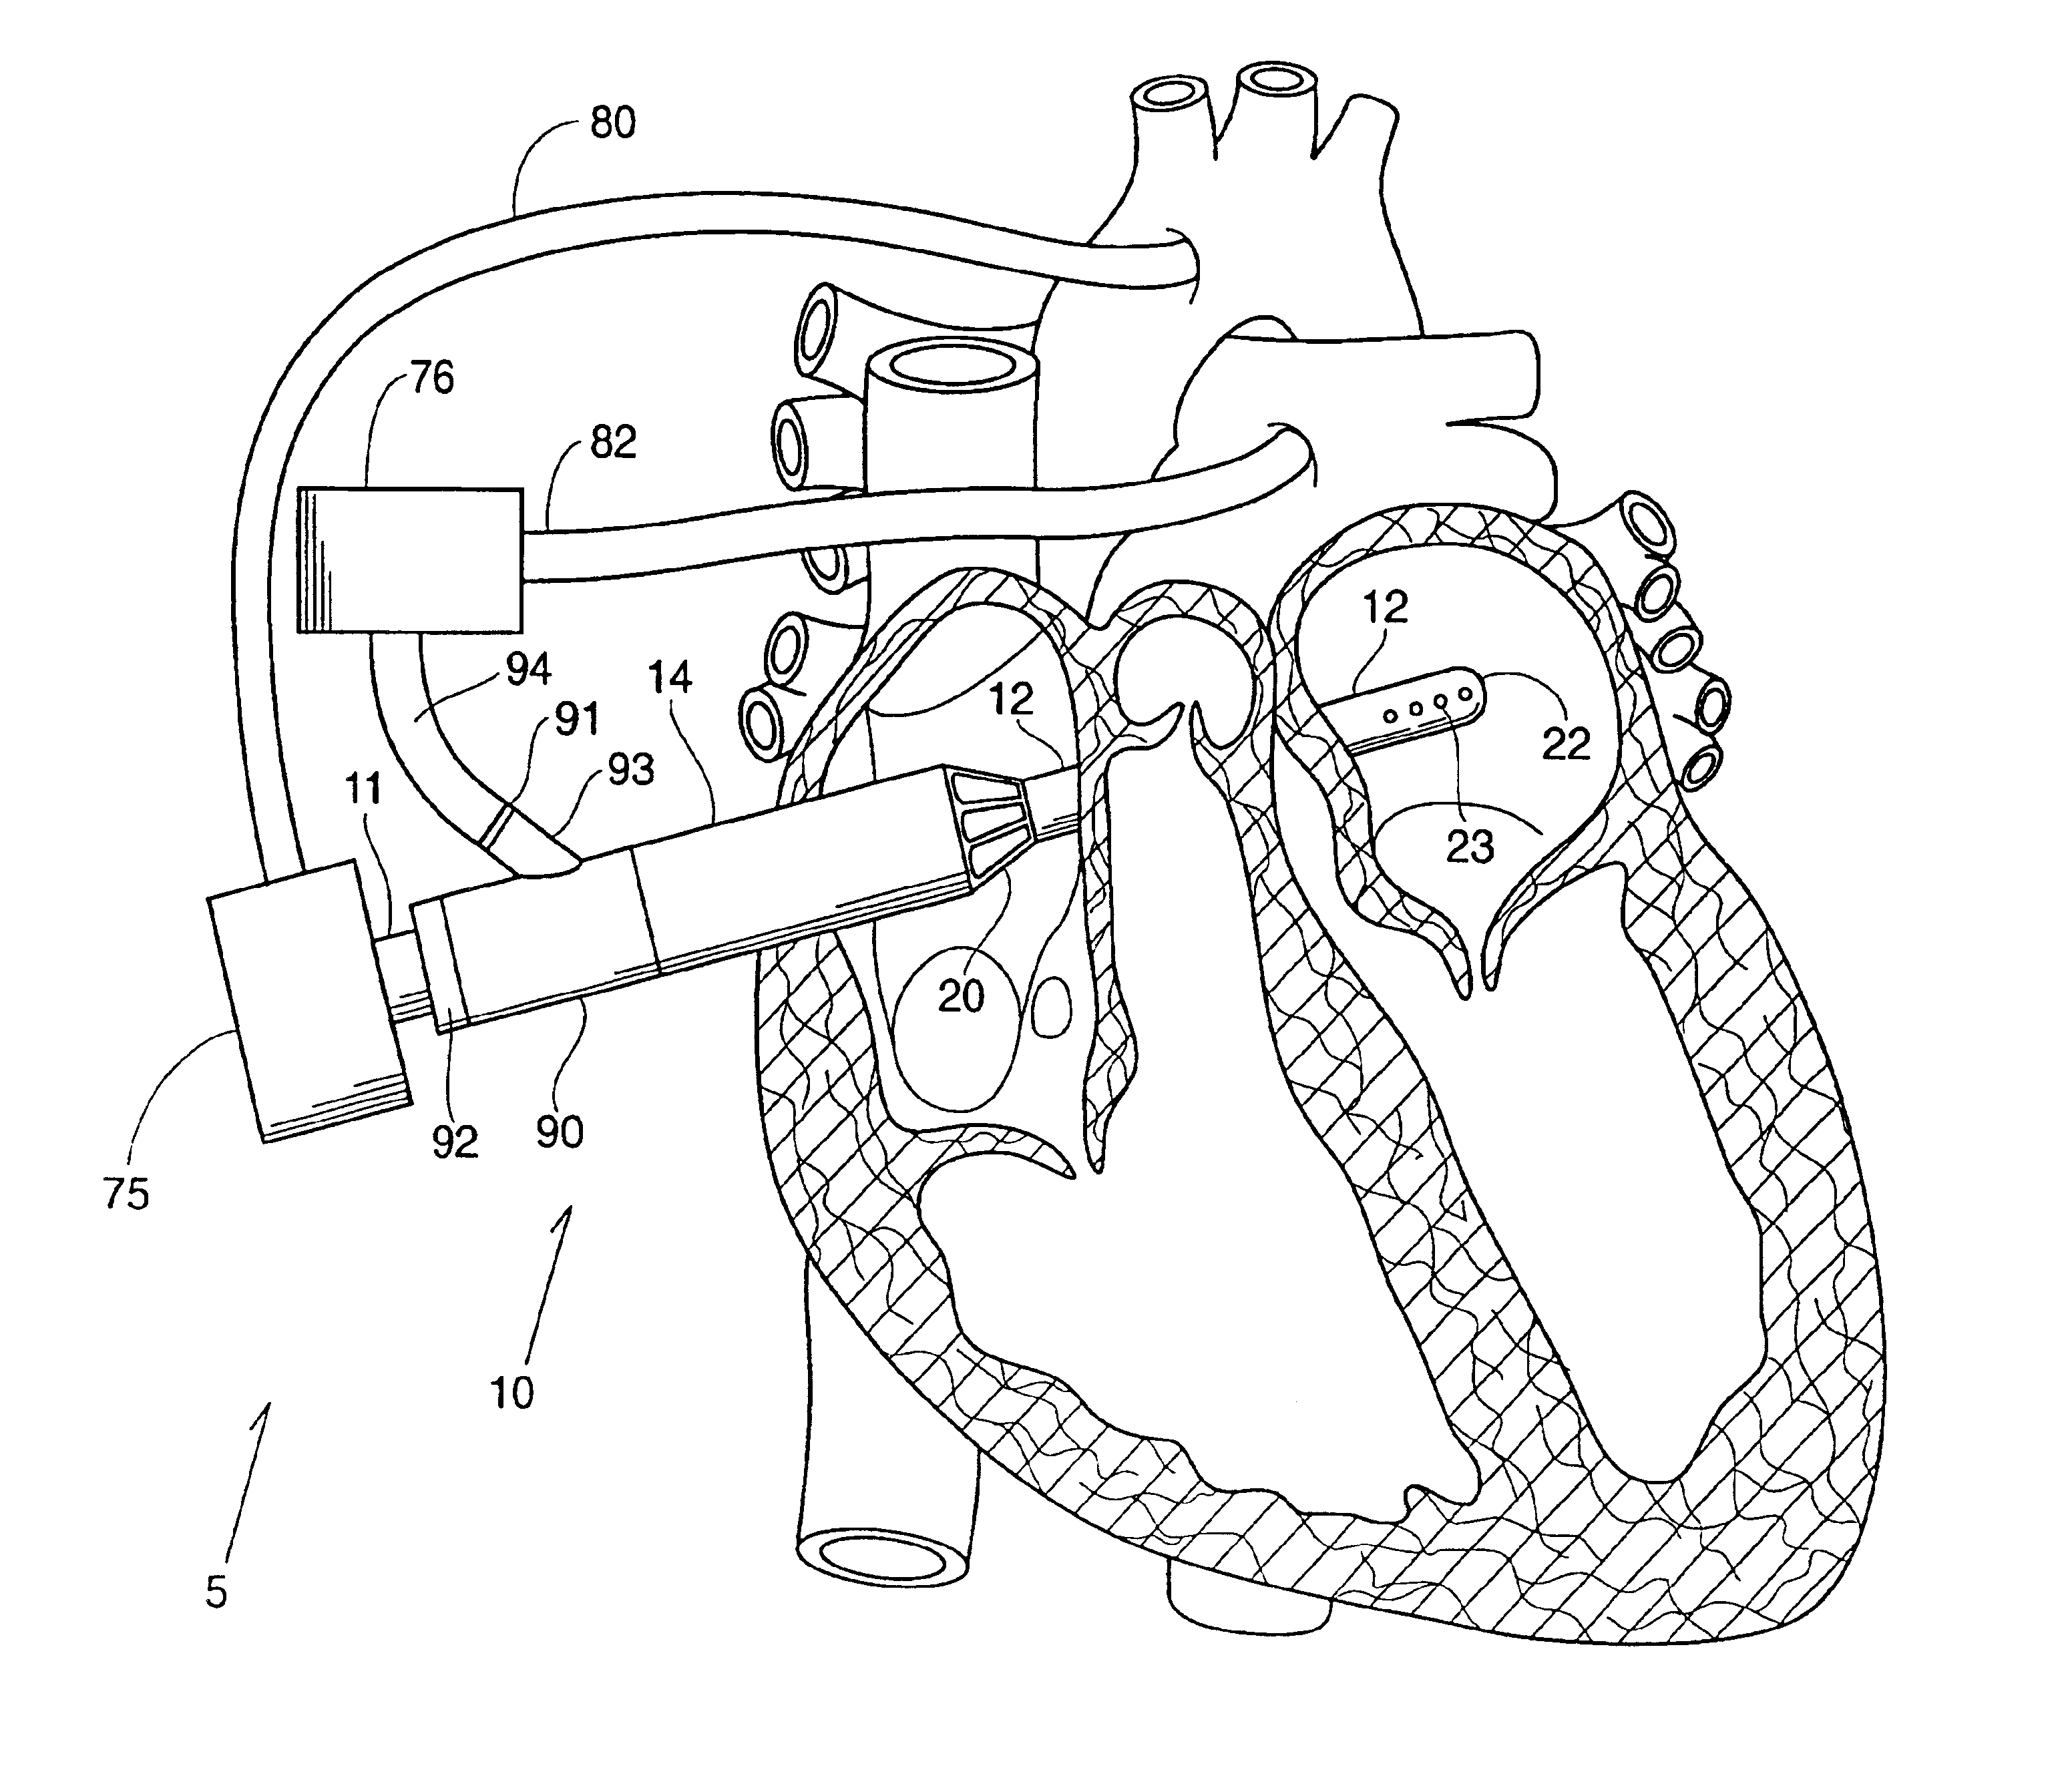 Left and right side heart support